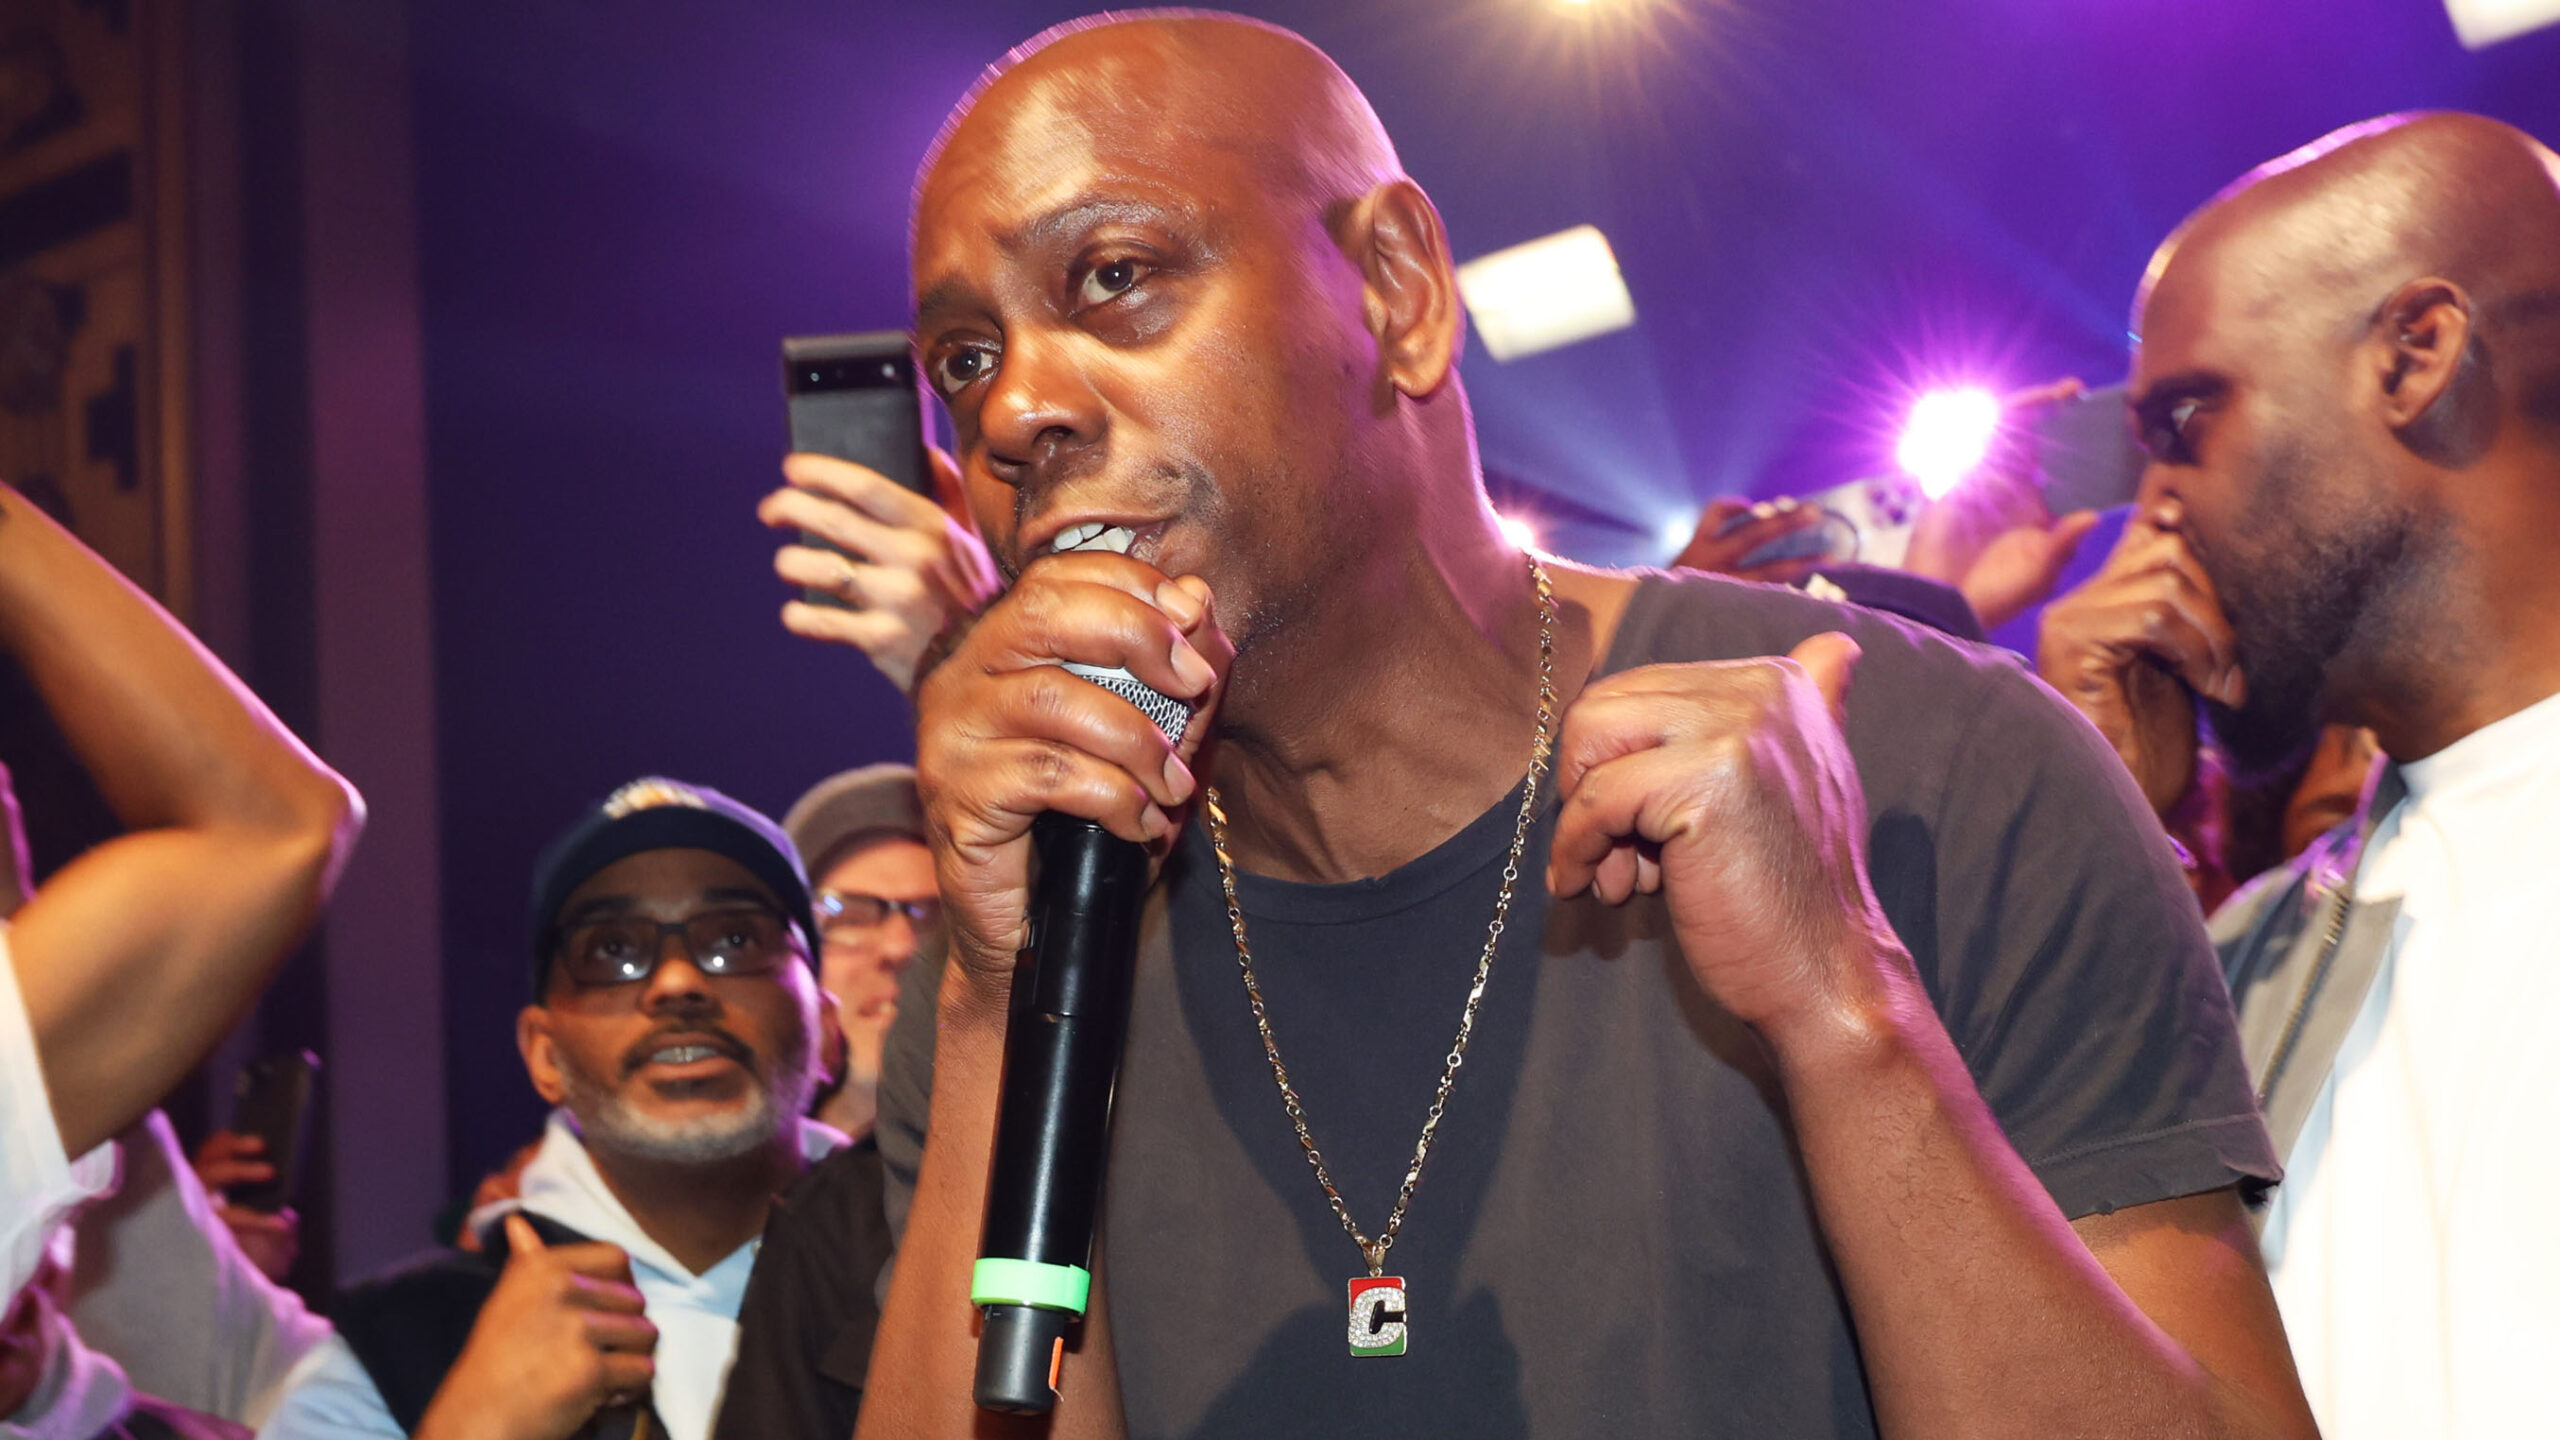 Dave Chappelle slams San Francisco: ‘What happened here?’